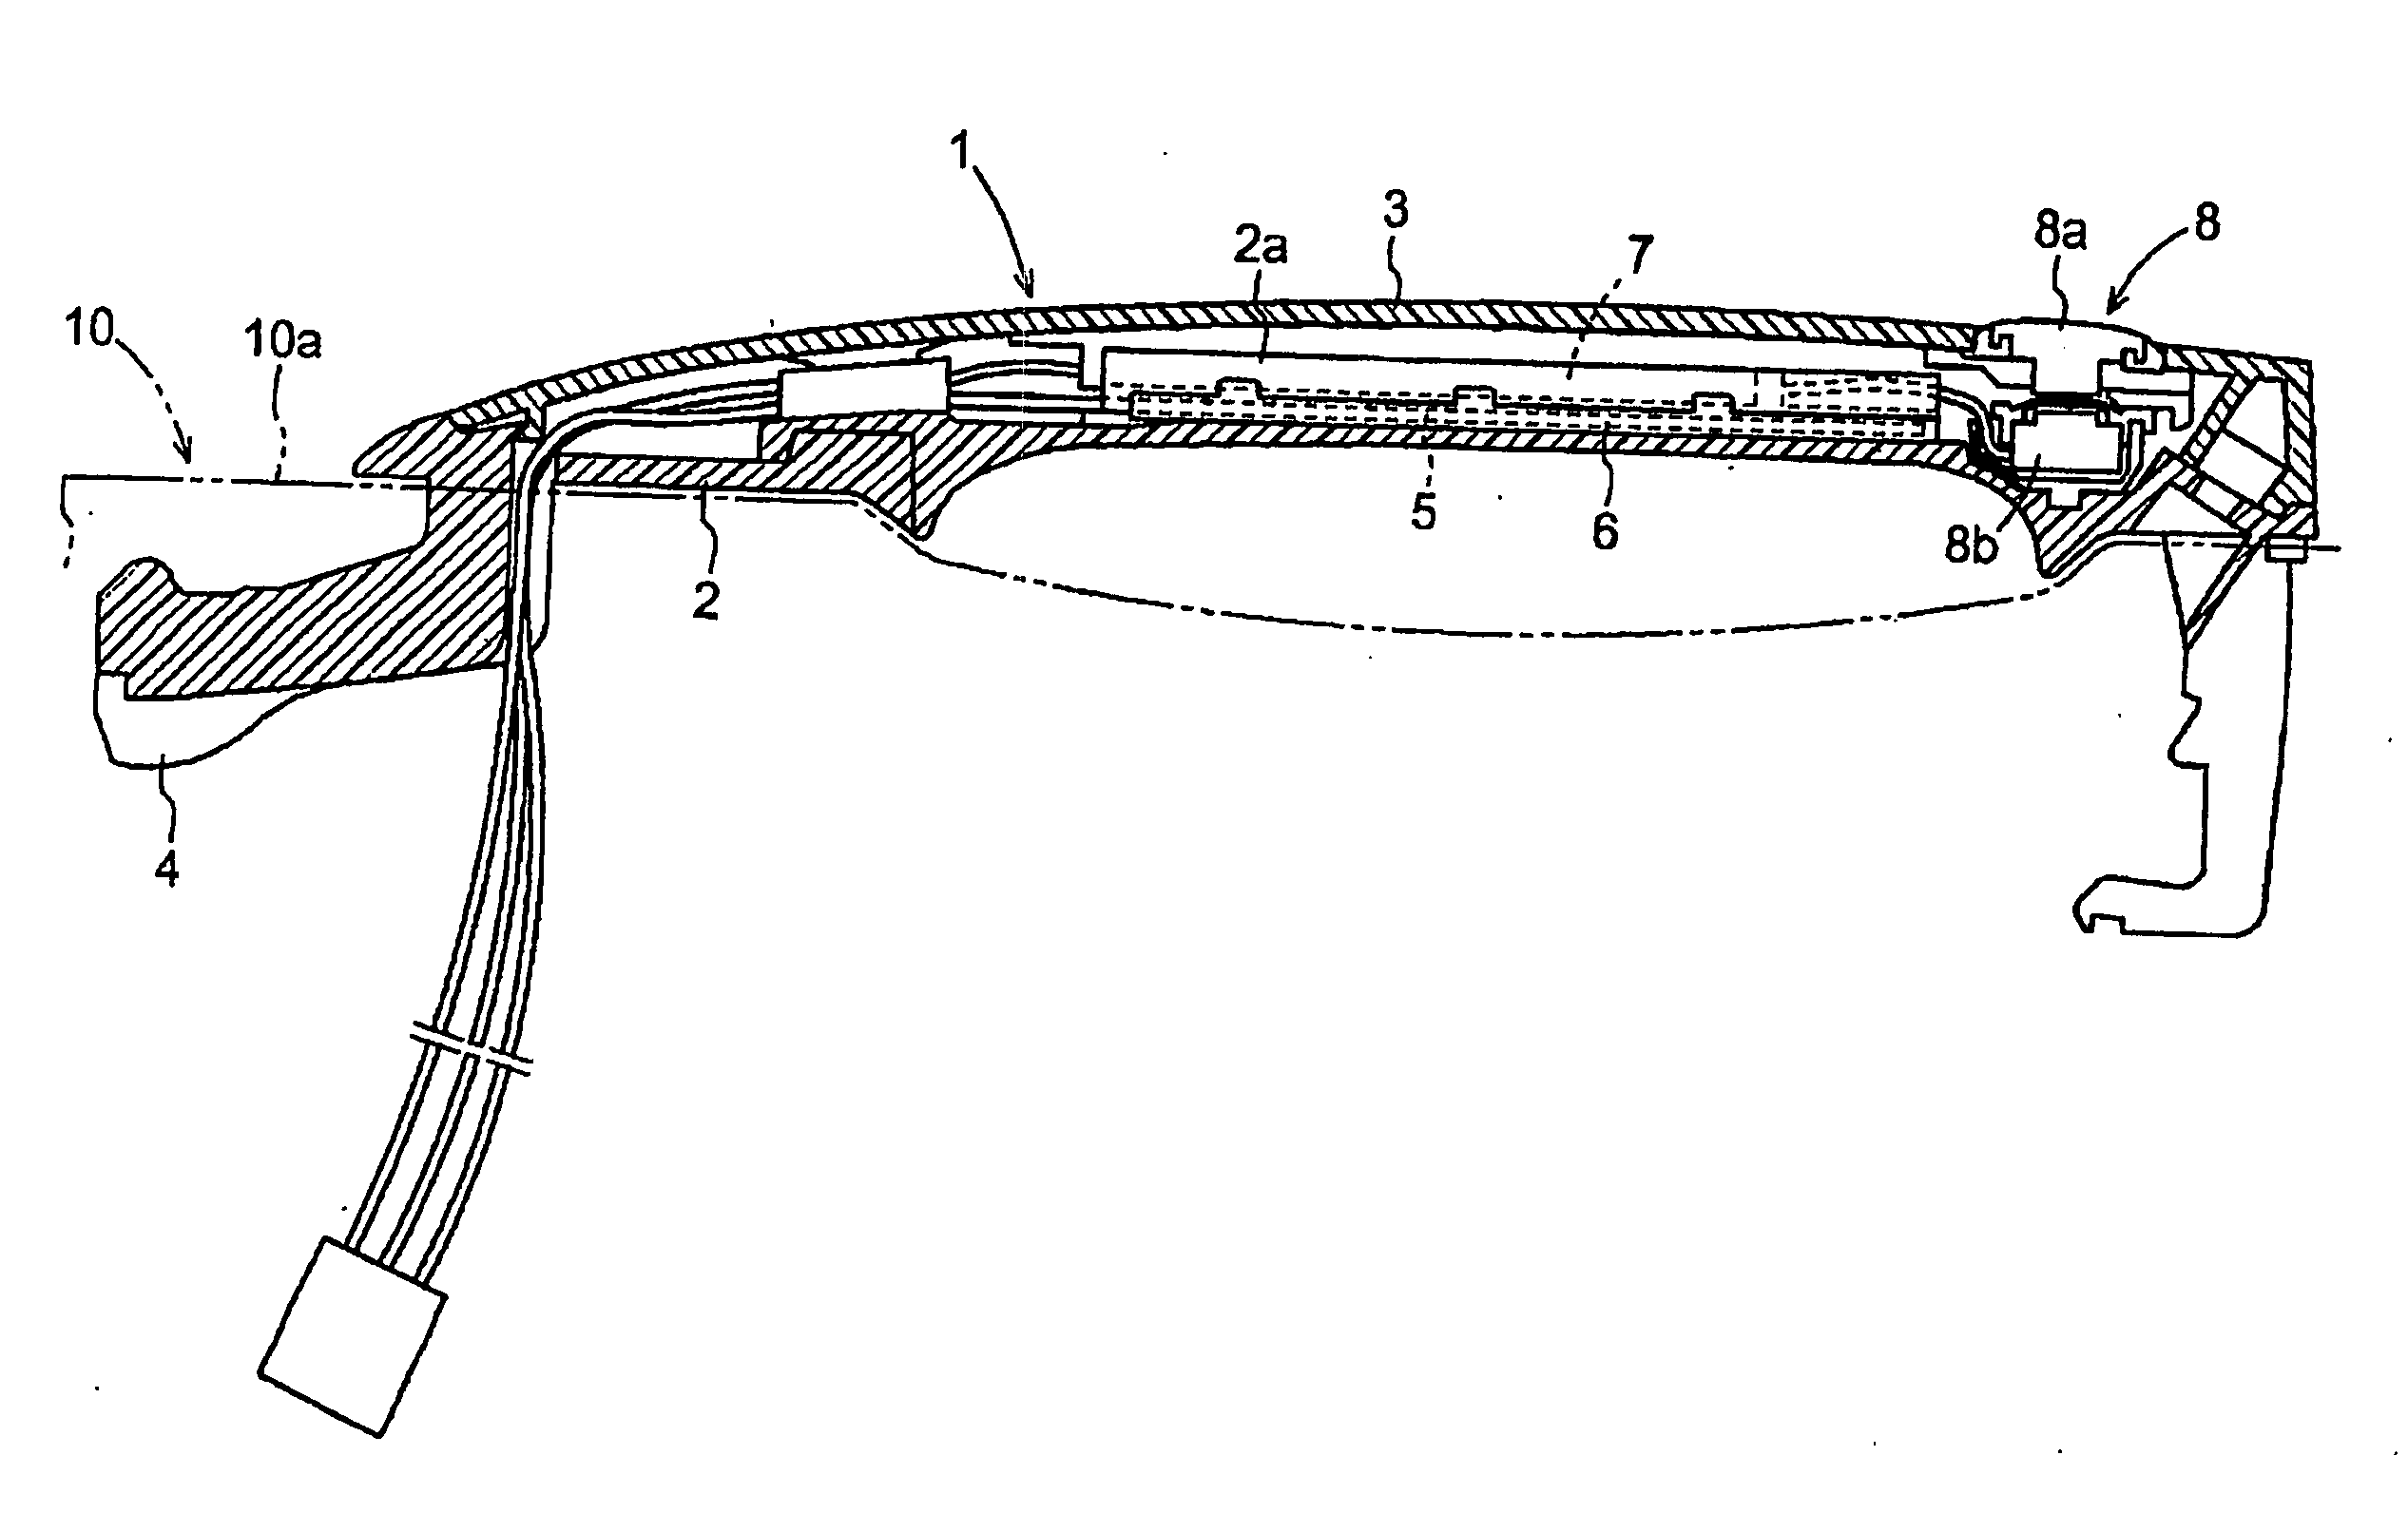 Human body detecting device for vehicles